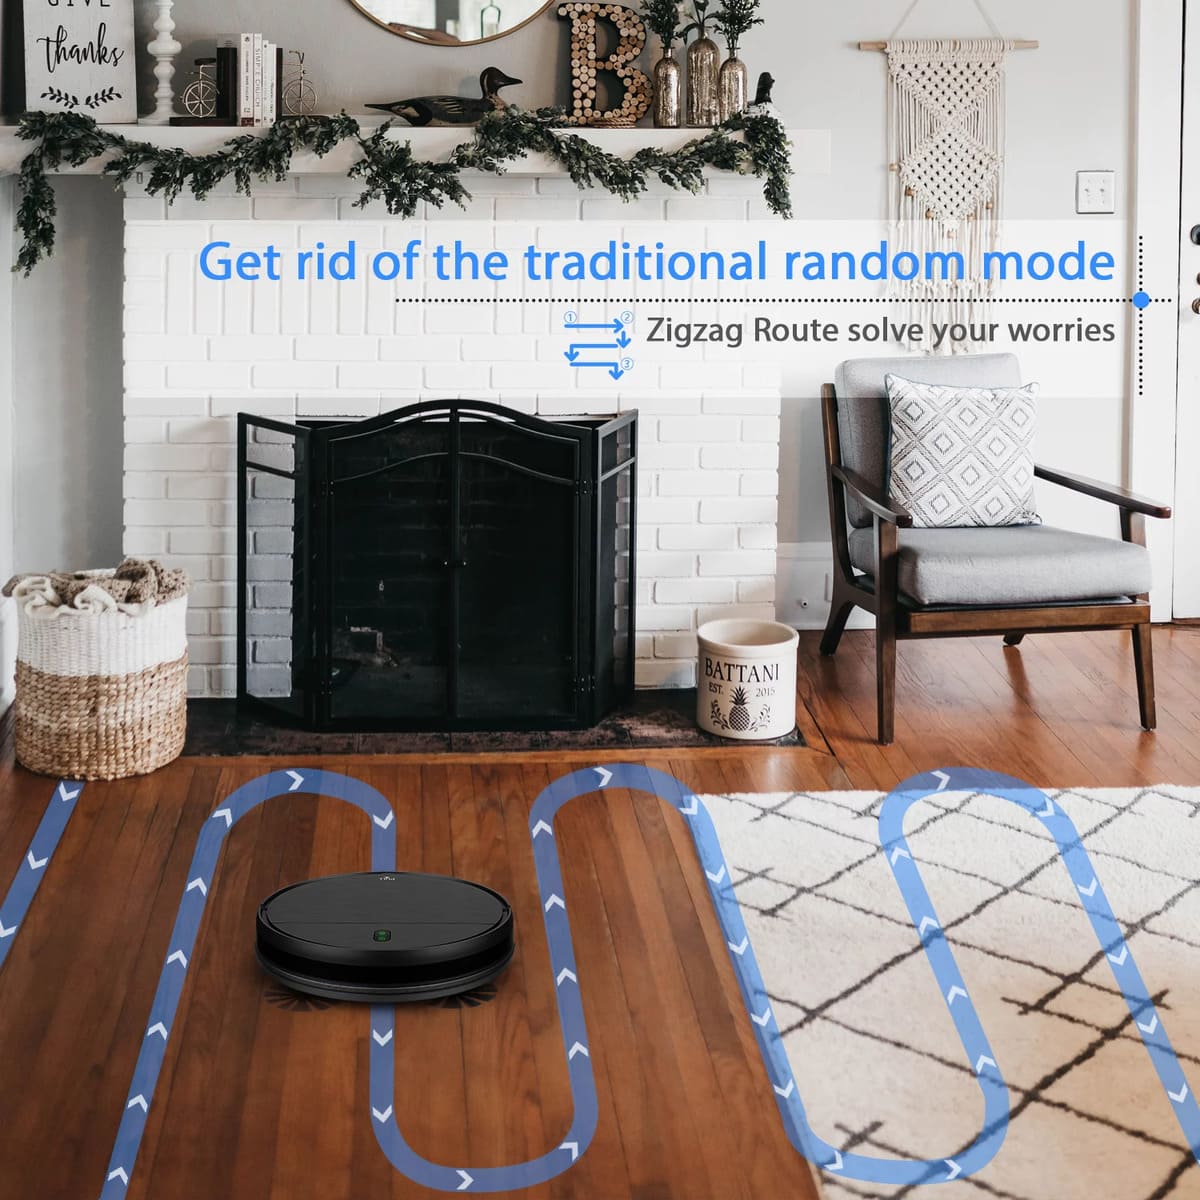 ONSON Robot Vacuum Cleaner, 2 in 1 Robot Vacuum and Mop Combo